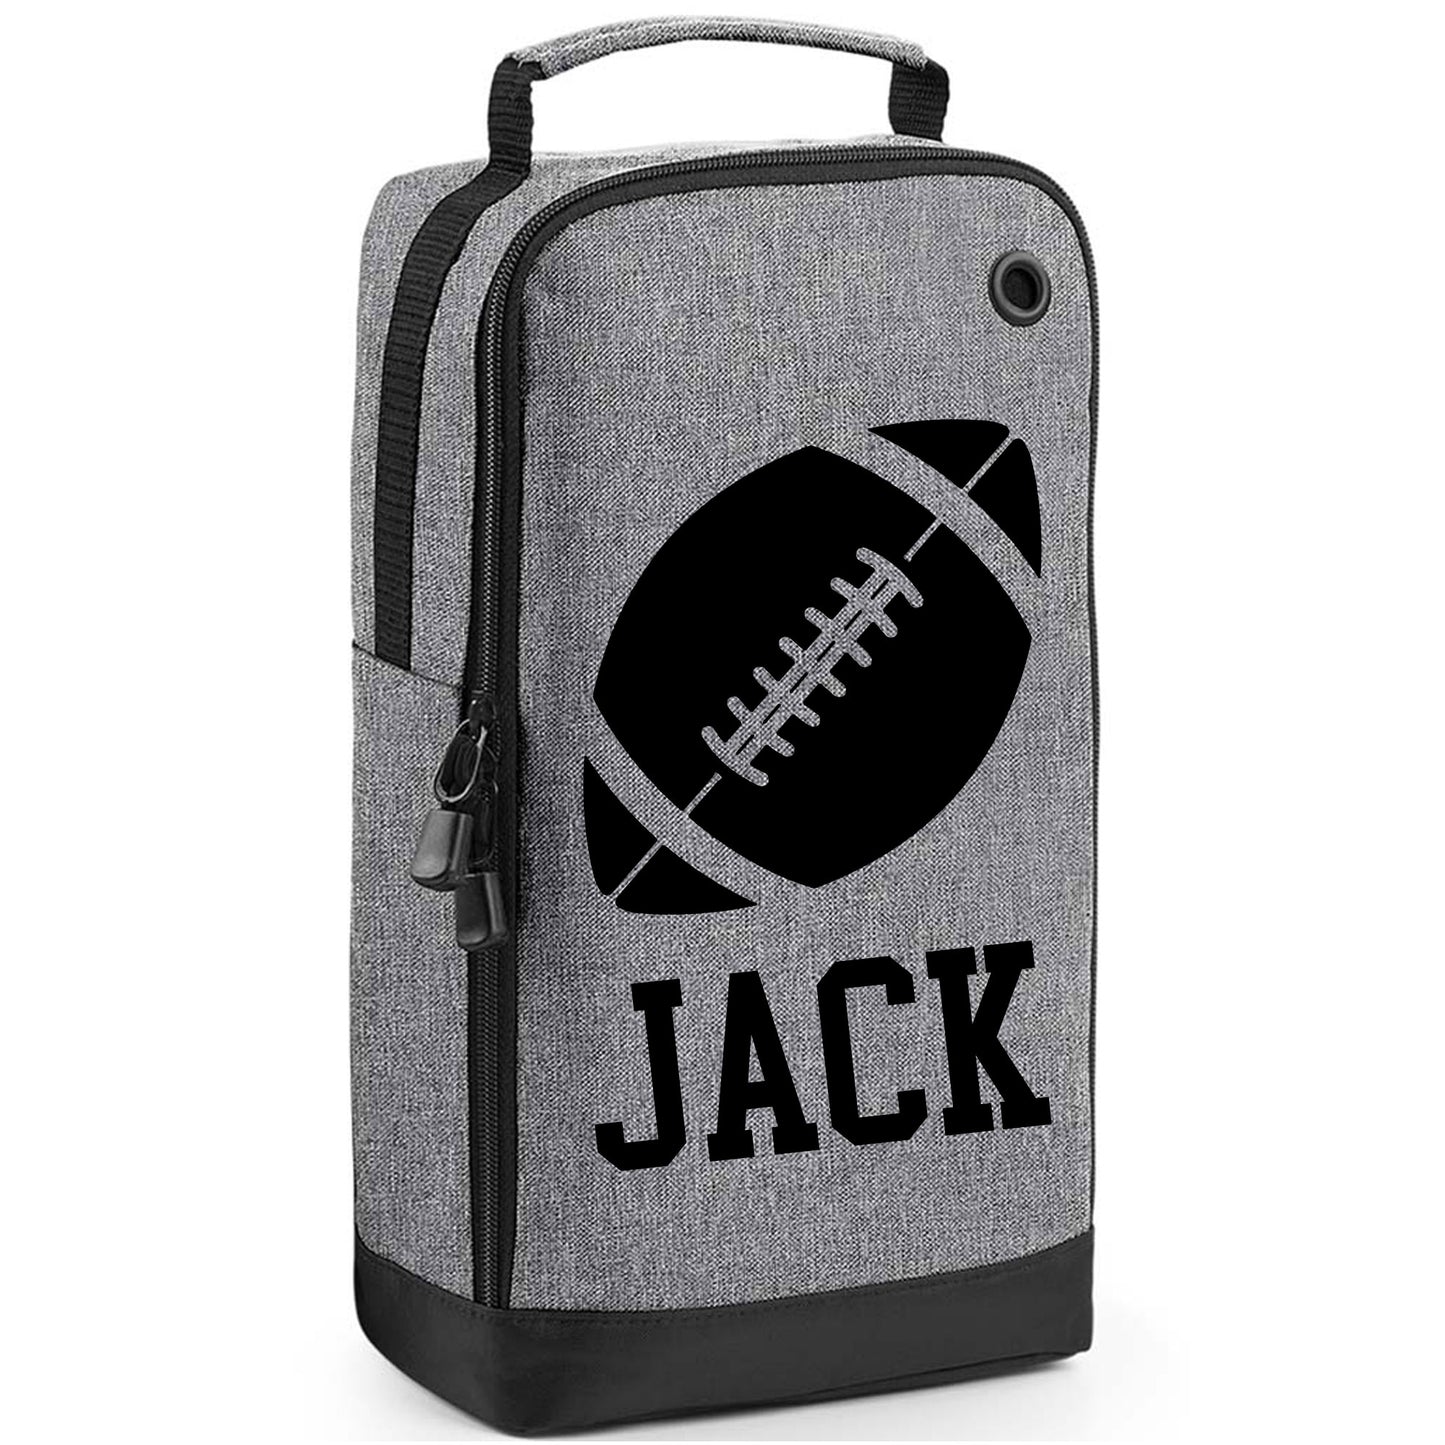 Personalised Rugby/ American Football Boot Bag with Design & Name  - Always Looking Good -   